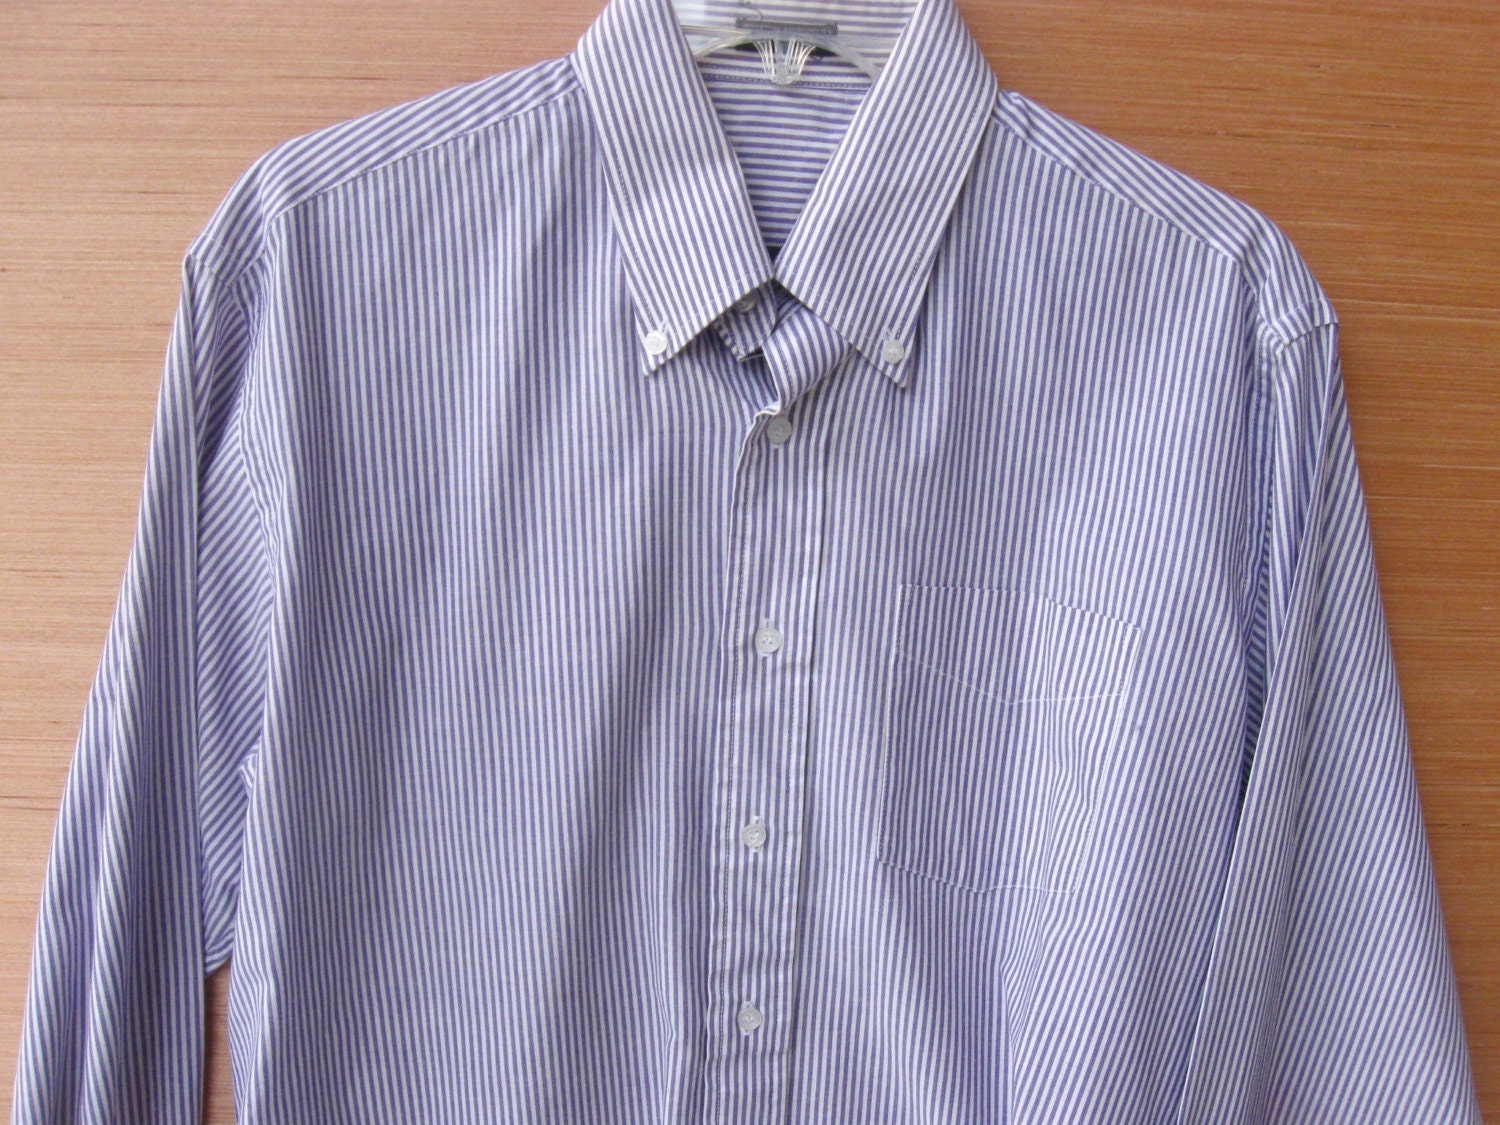 Vintage Men's Striped Shirt Purple and White Long Sleeve